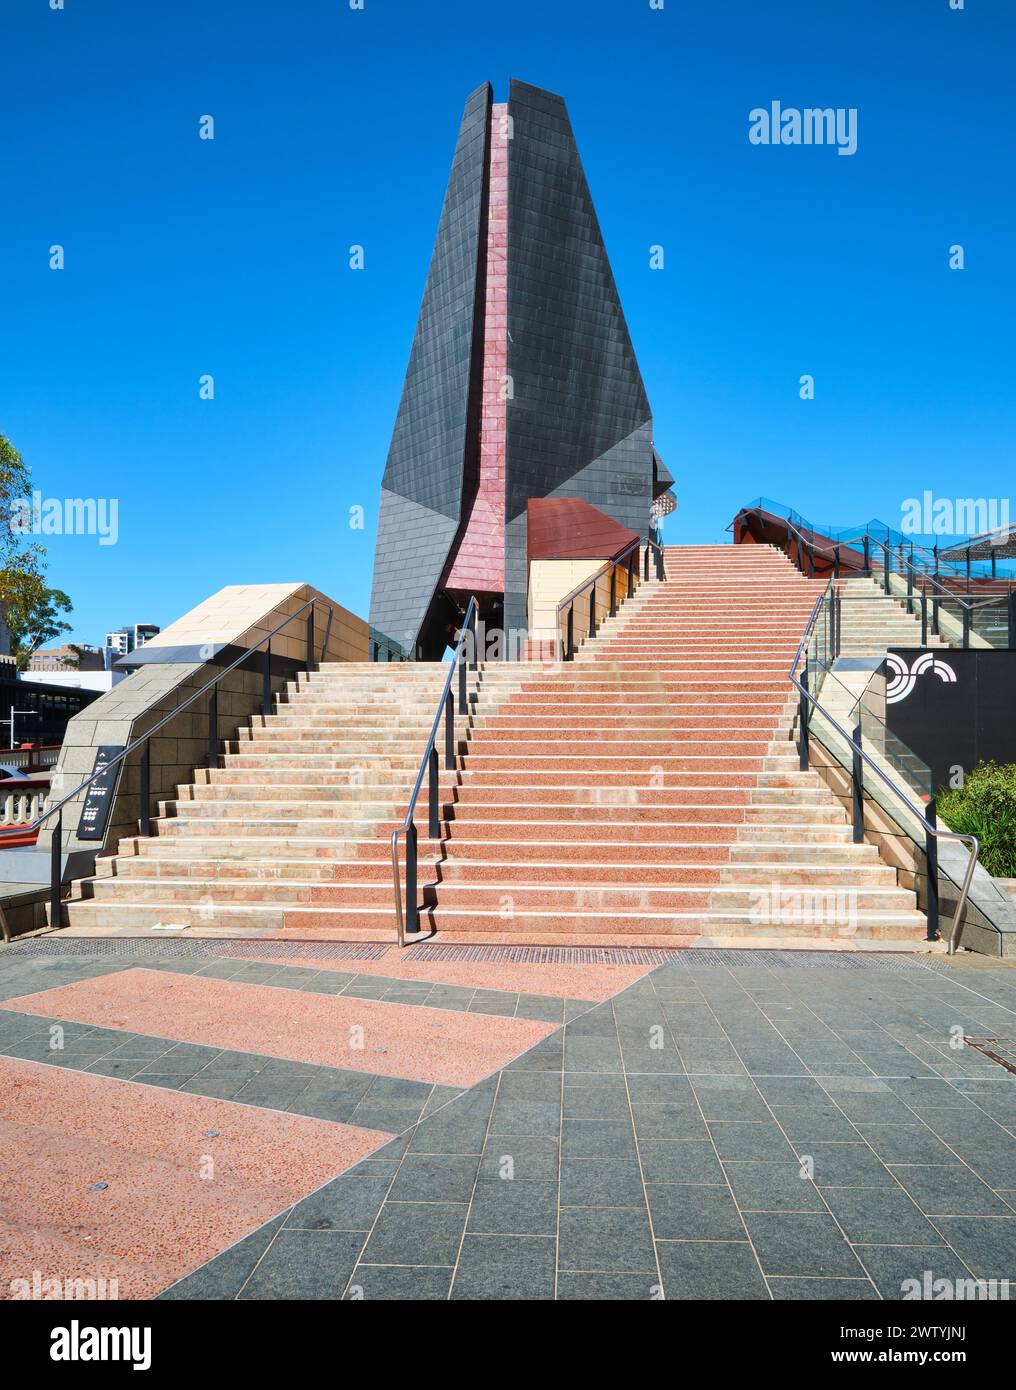 Stairs going up to a walkway at Yagan Square, a public space linking Northridge to the central business district in Perth, Western Australia. Stock Photo